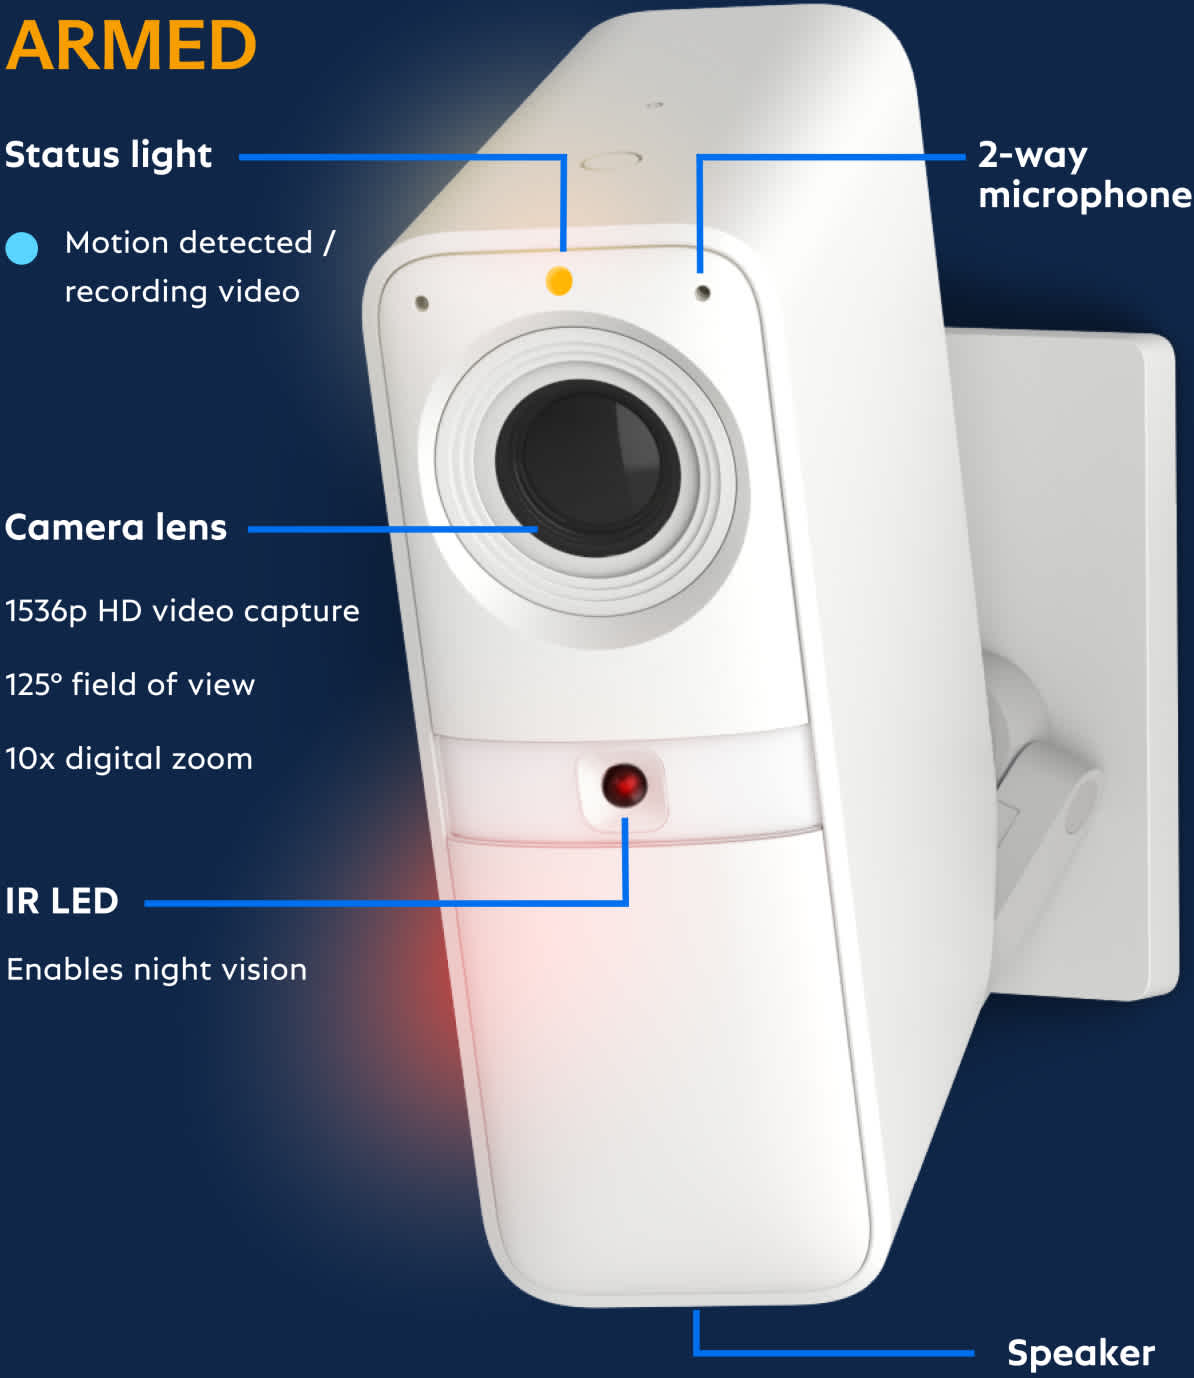 Image diagram of the Wireless Indoor Camera and its features when the shutter is open.